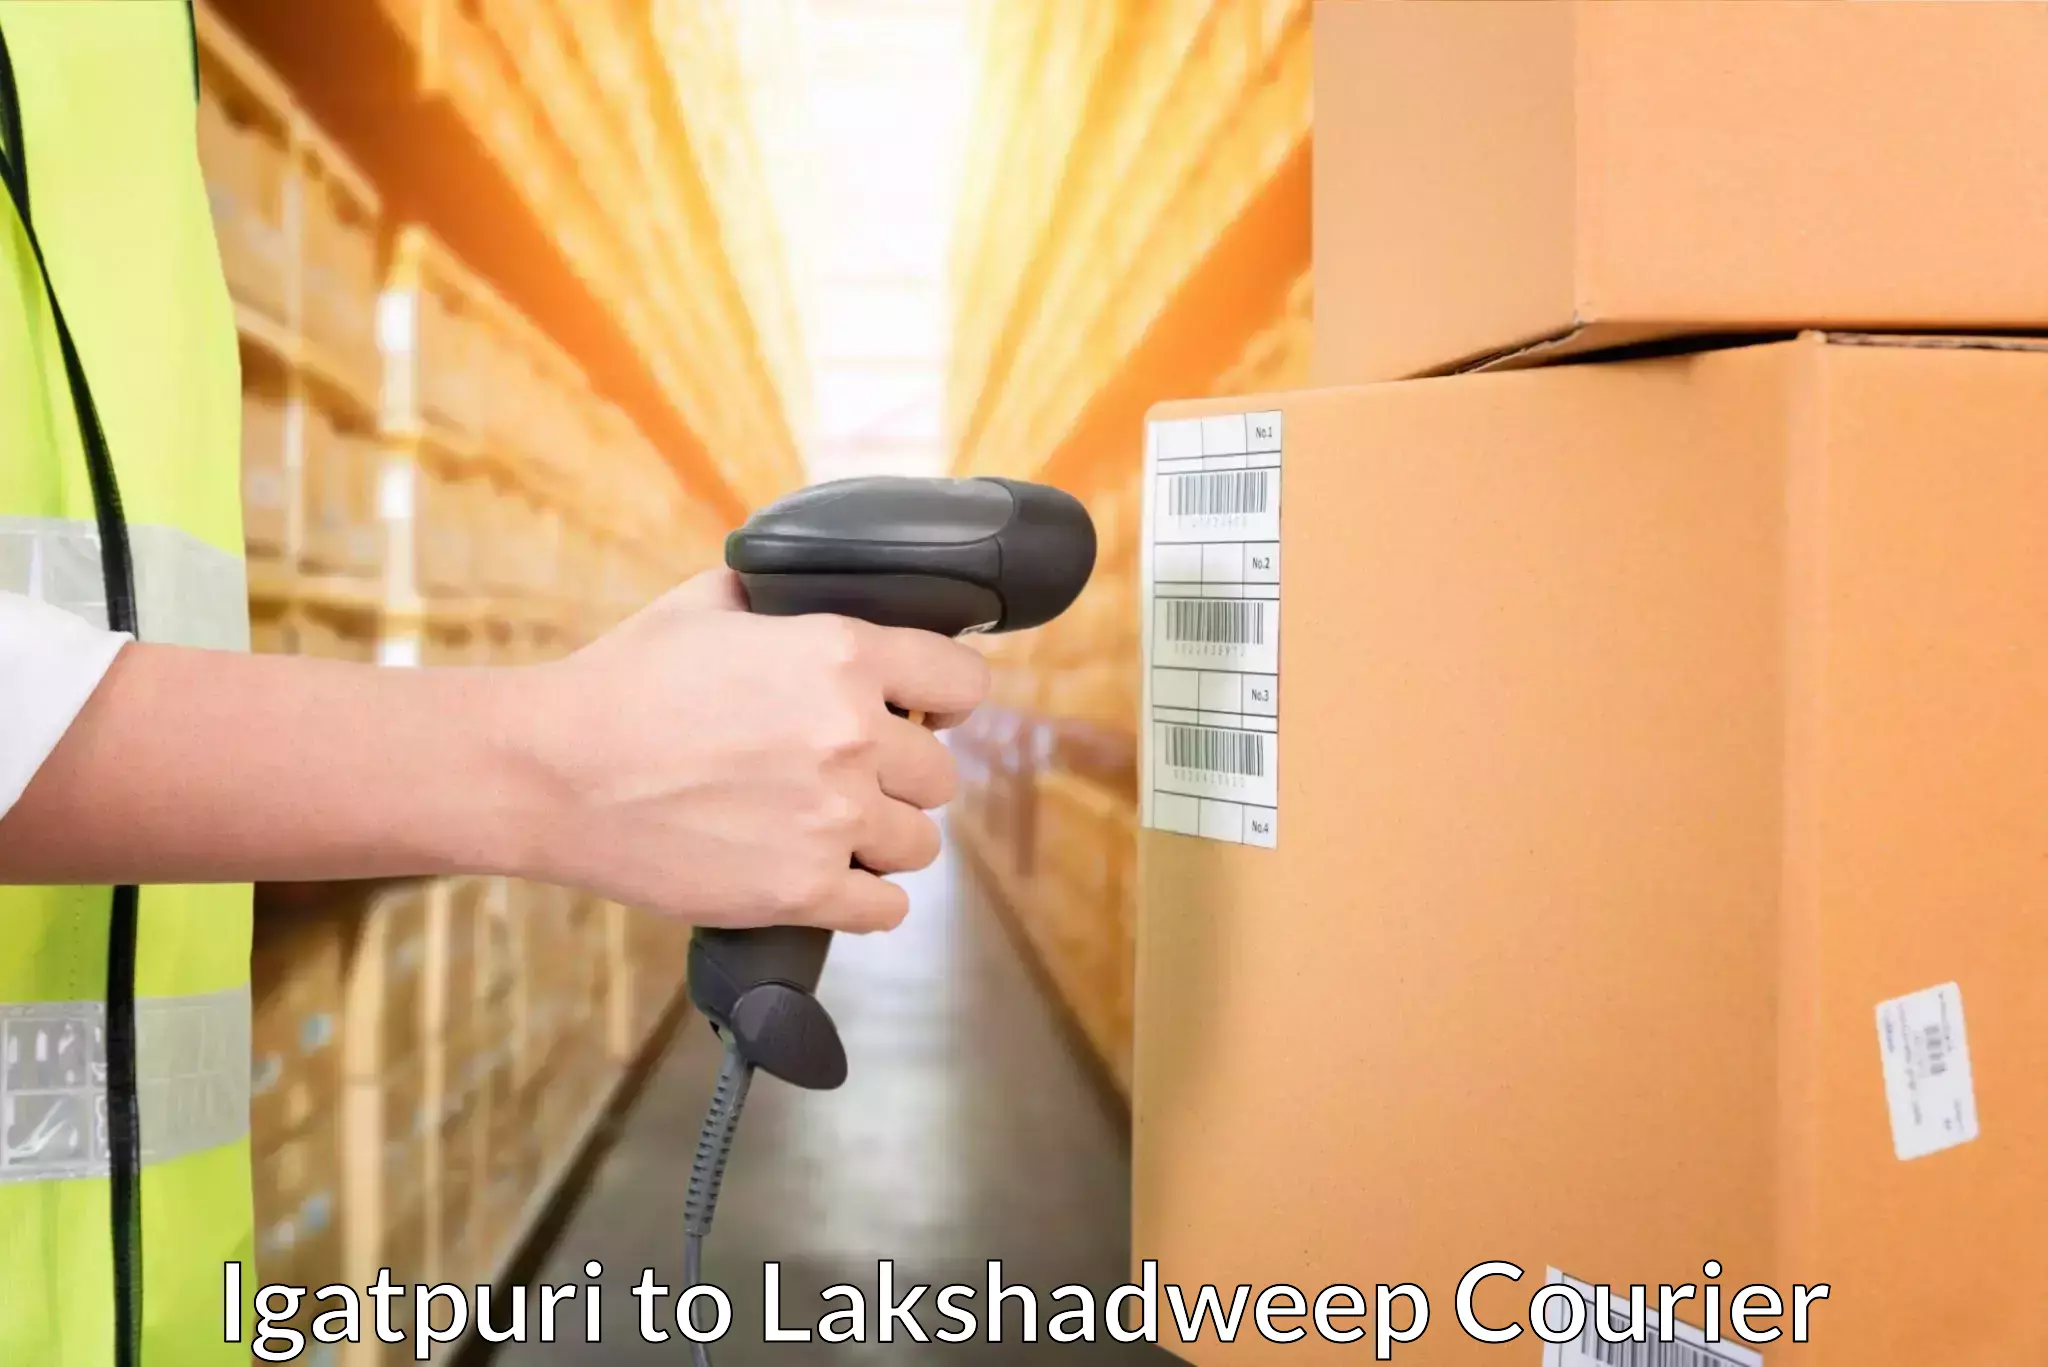 Express delivery capabilities Igatpuri to Lakshadweep